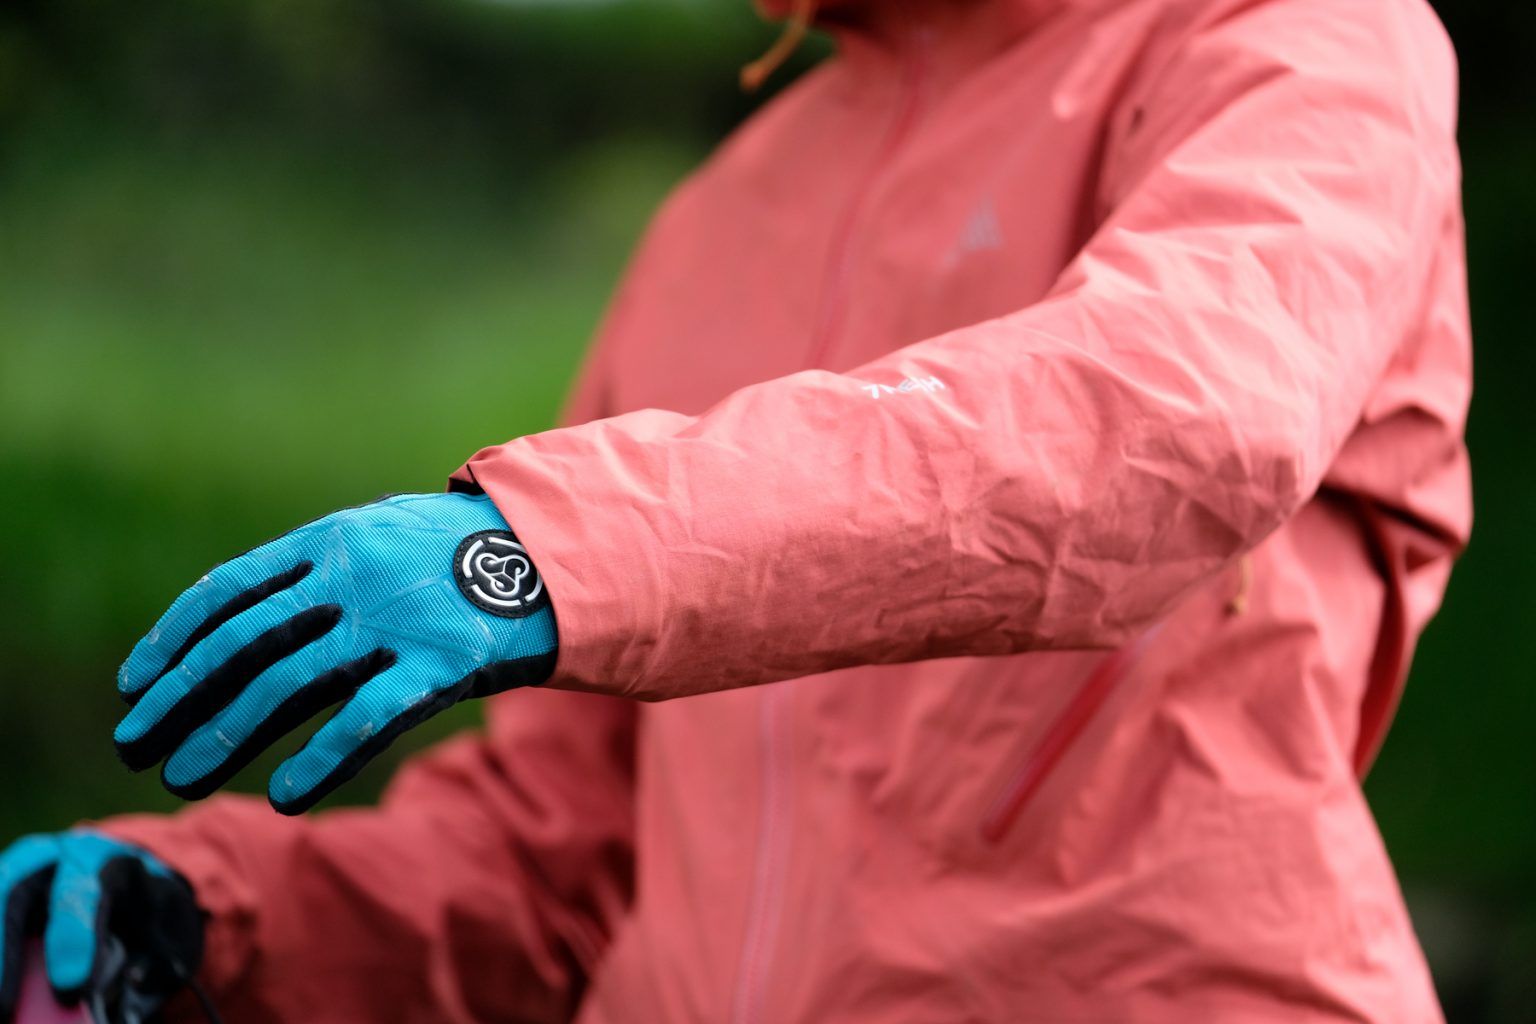 7MESH Copilot Jacket Reviewed | Packable Waterproofing for the Trail